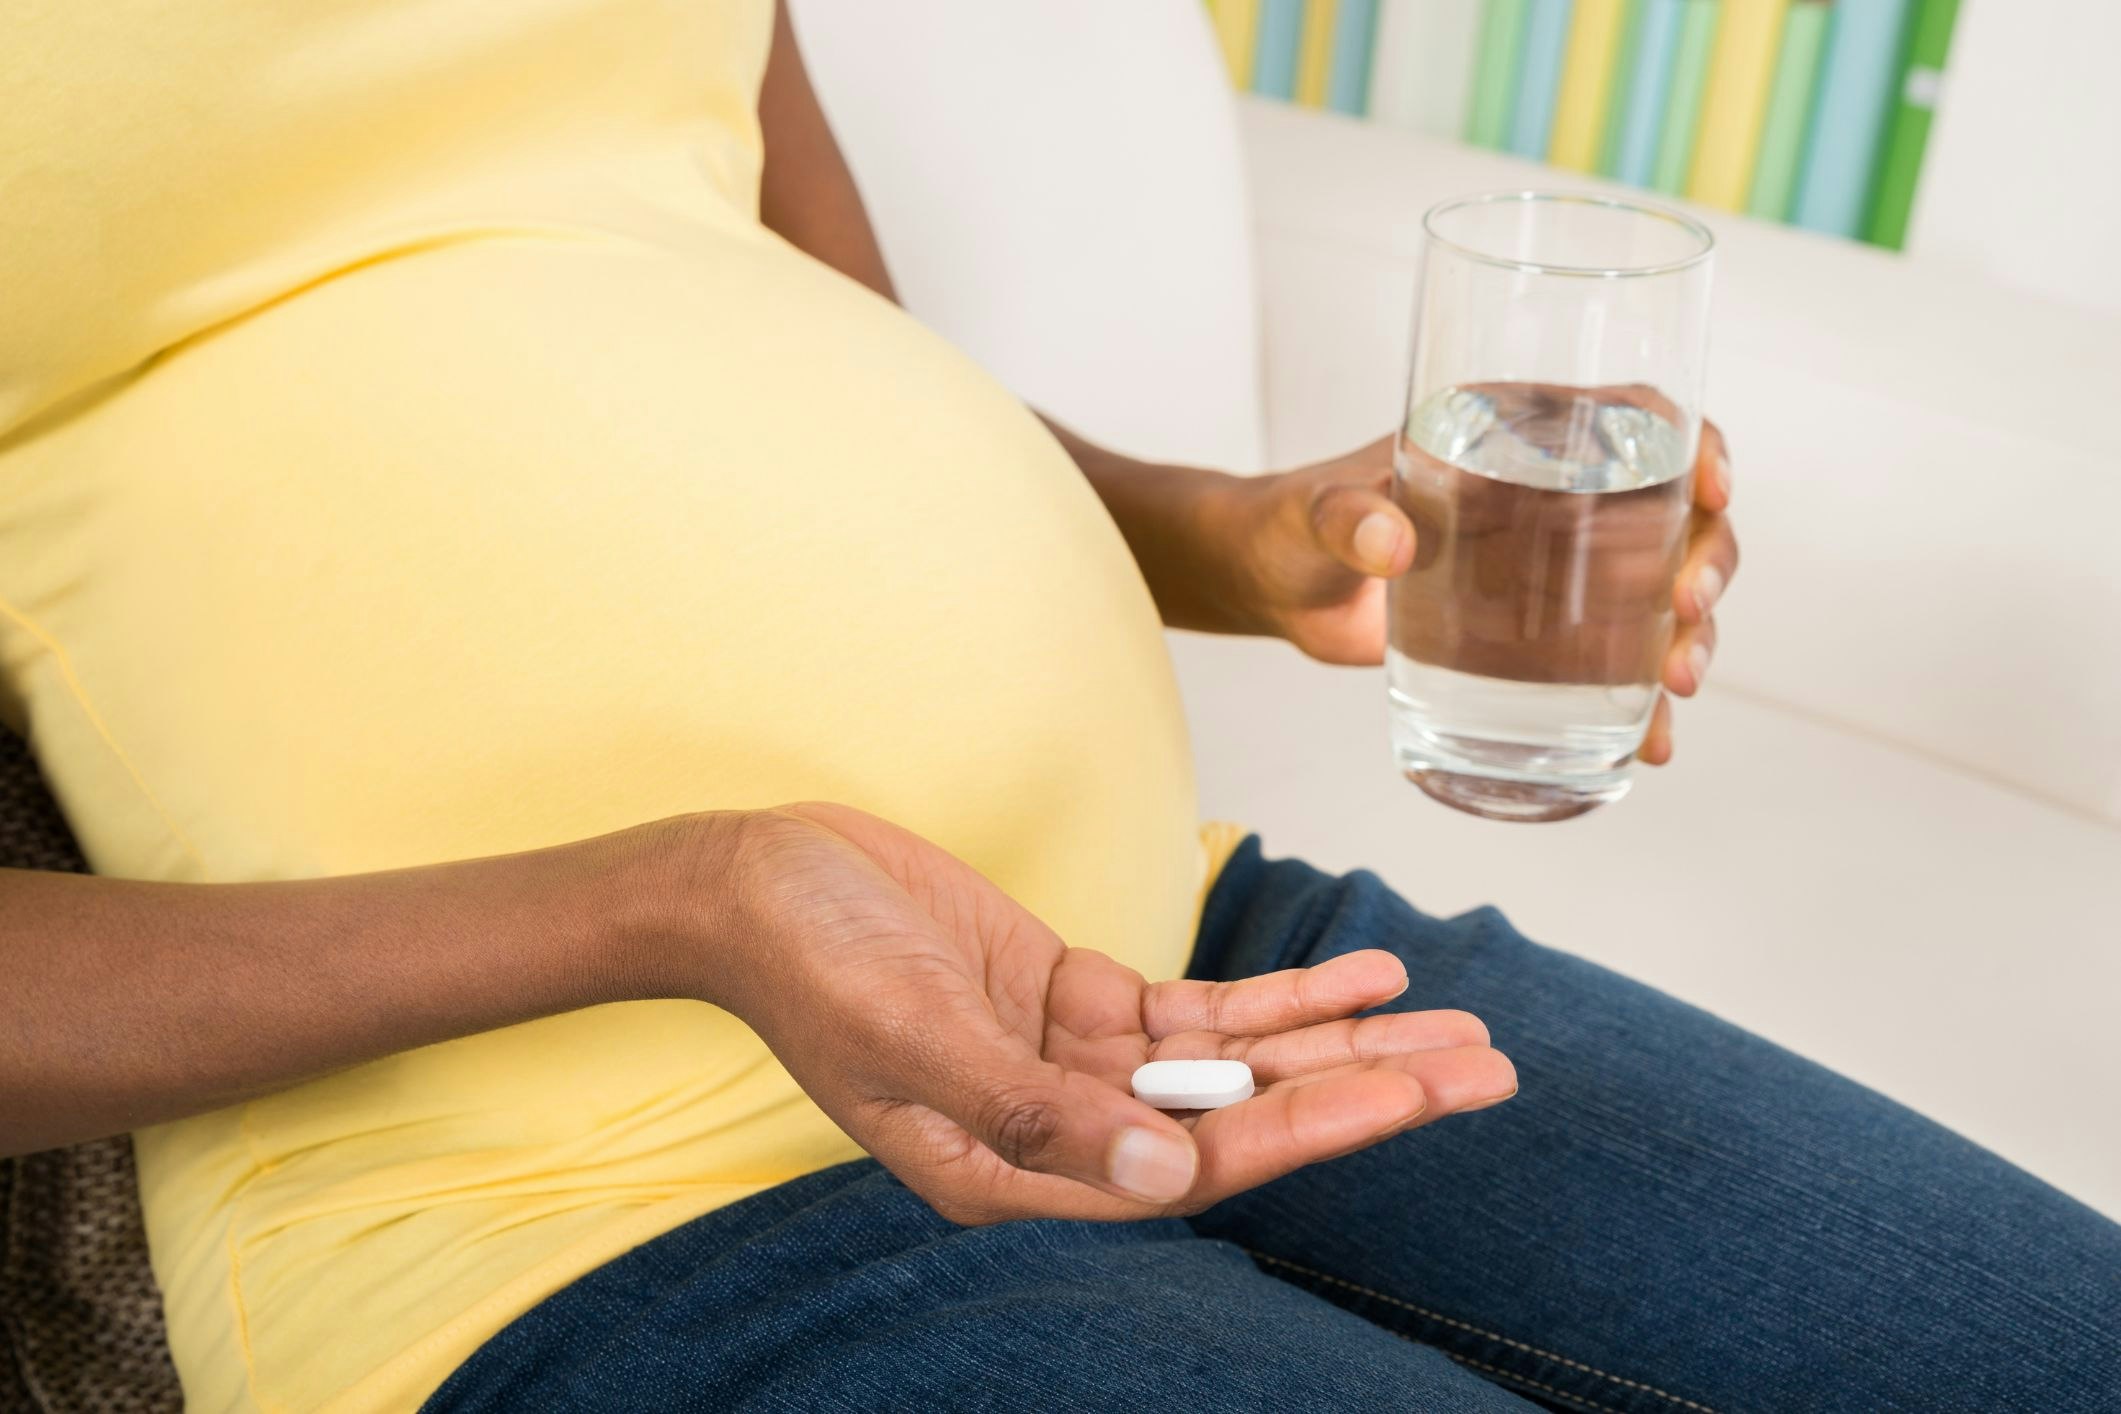 Researchers at an Australian university have recently collaborated with other organisations to study the effects of antipsychotic medication use in pregnancy. [Source: Shutterstock]
